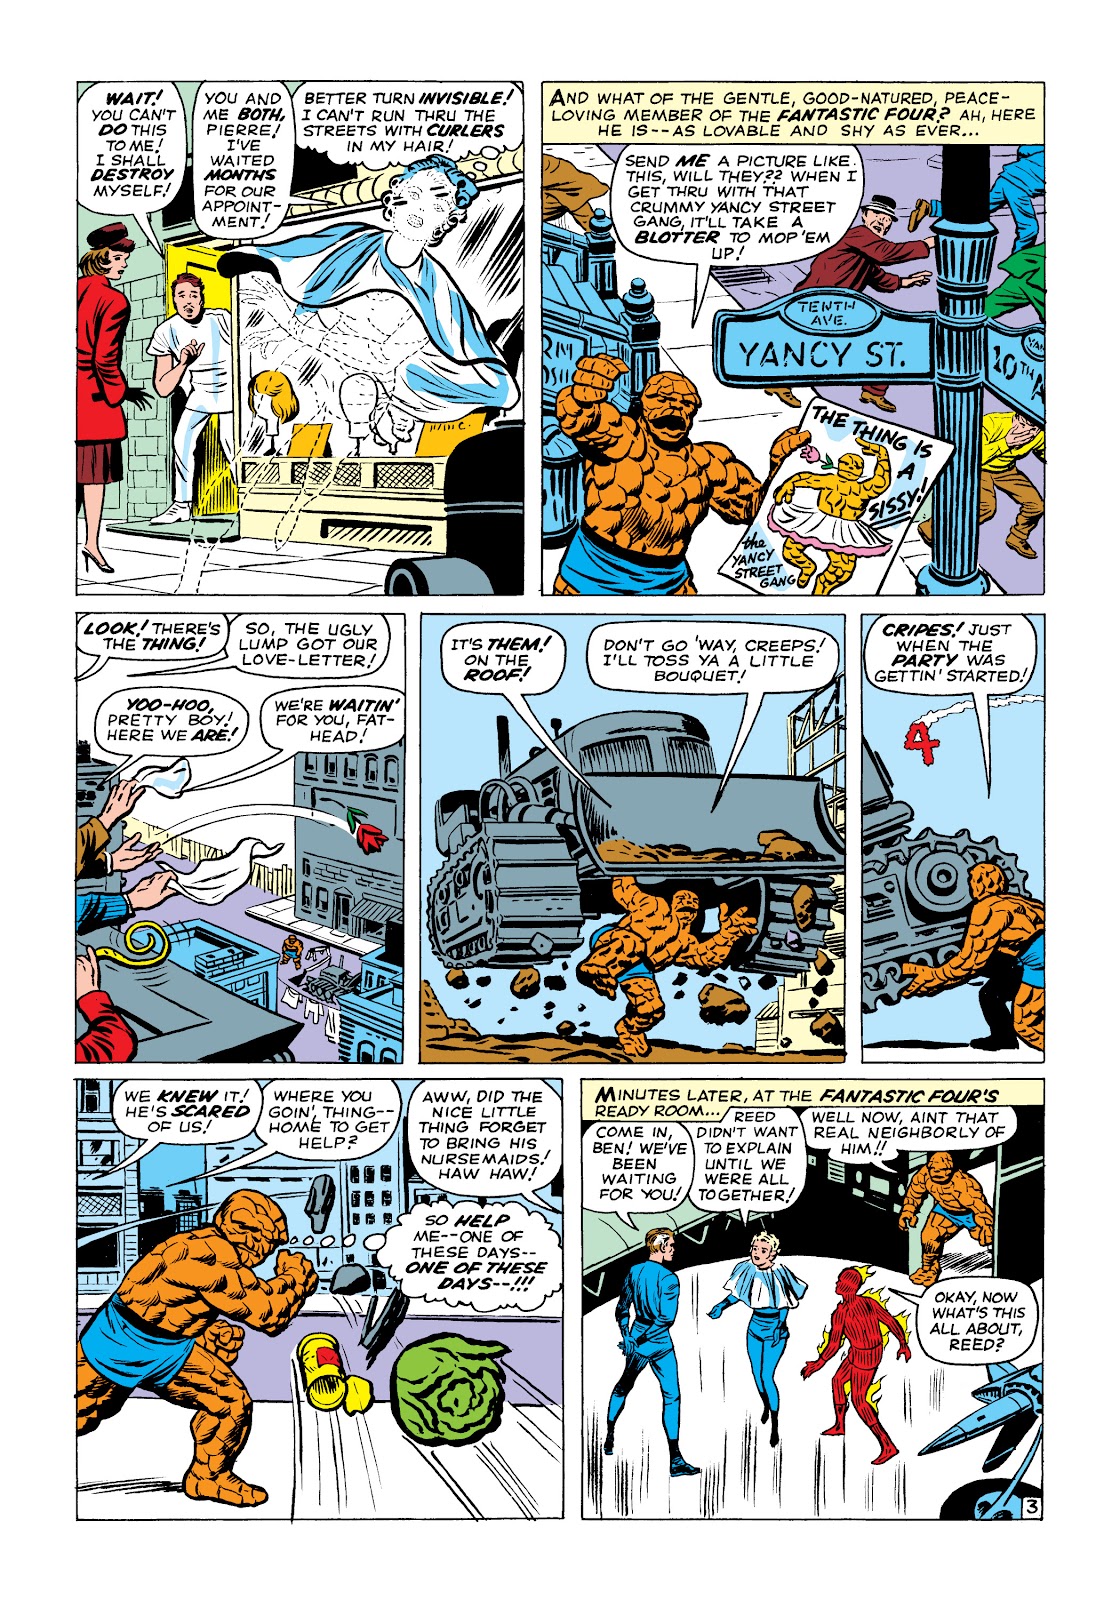 Read online Marvel Masterworks: The Fantastic Four comic - Issue # TPB 2 (Part 2) - 3